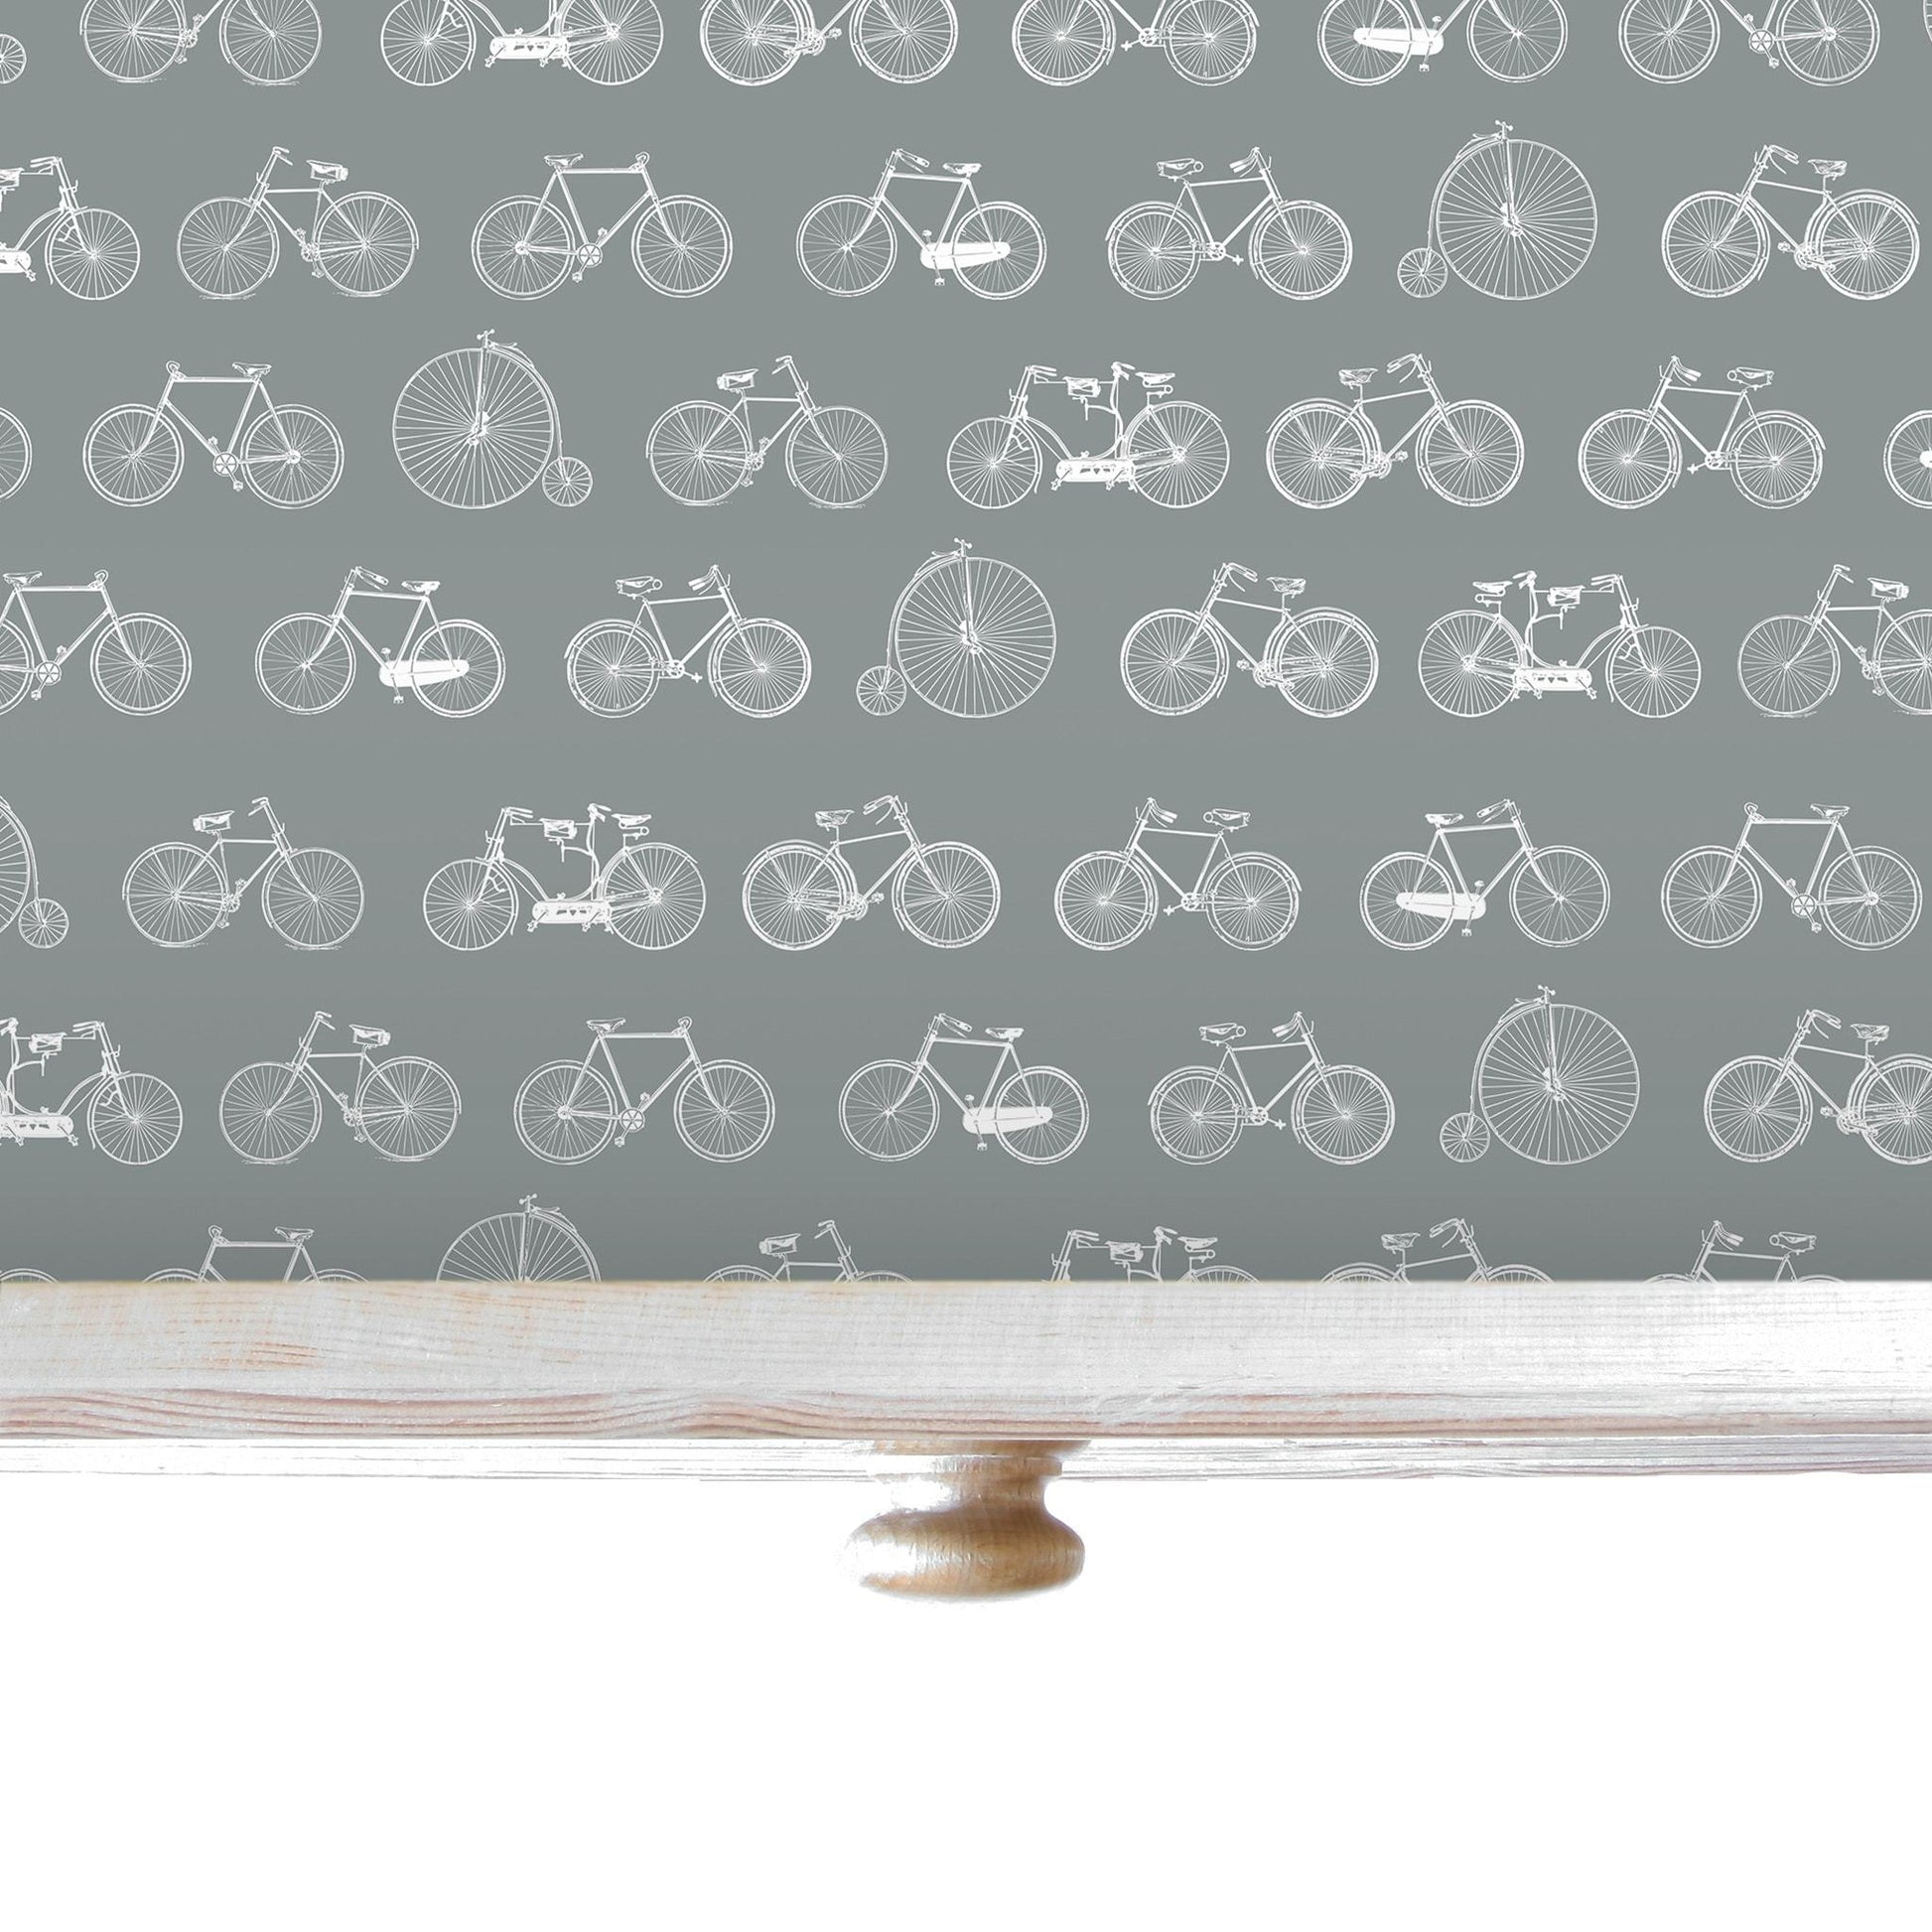 THE MASTER HERBALIST | Wipe Clean & Unscented Drawer Liners with a BICYCLE DESIGN on DUSK BLUE.  Perfect for Drawers, Shelves, Cupboards & Cabinets.